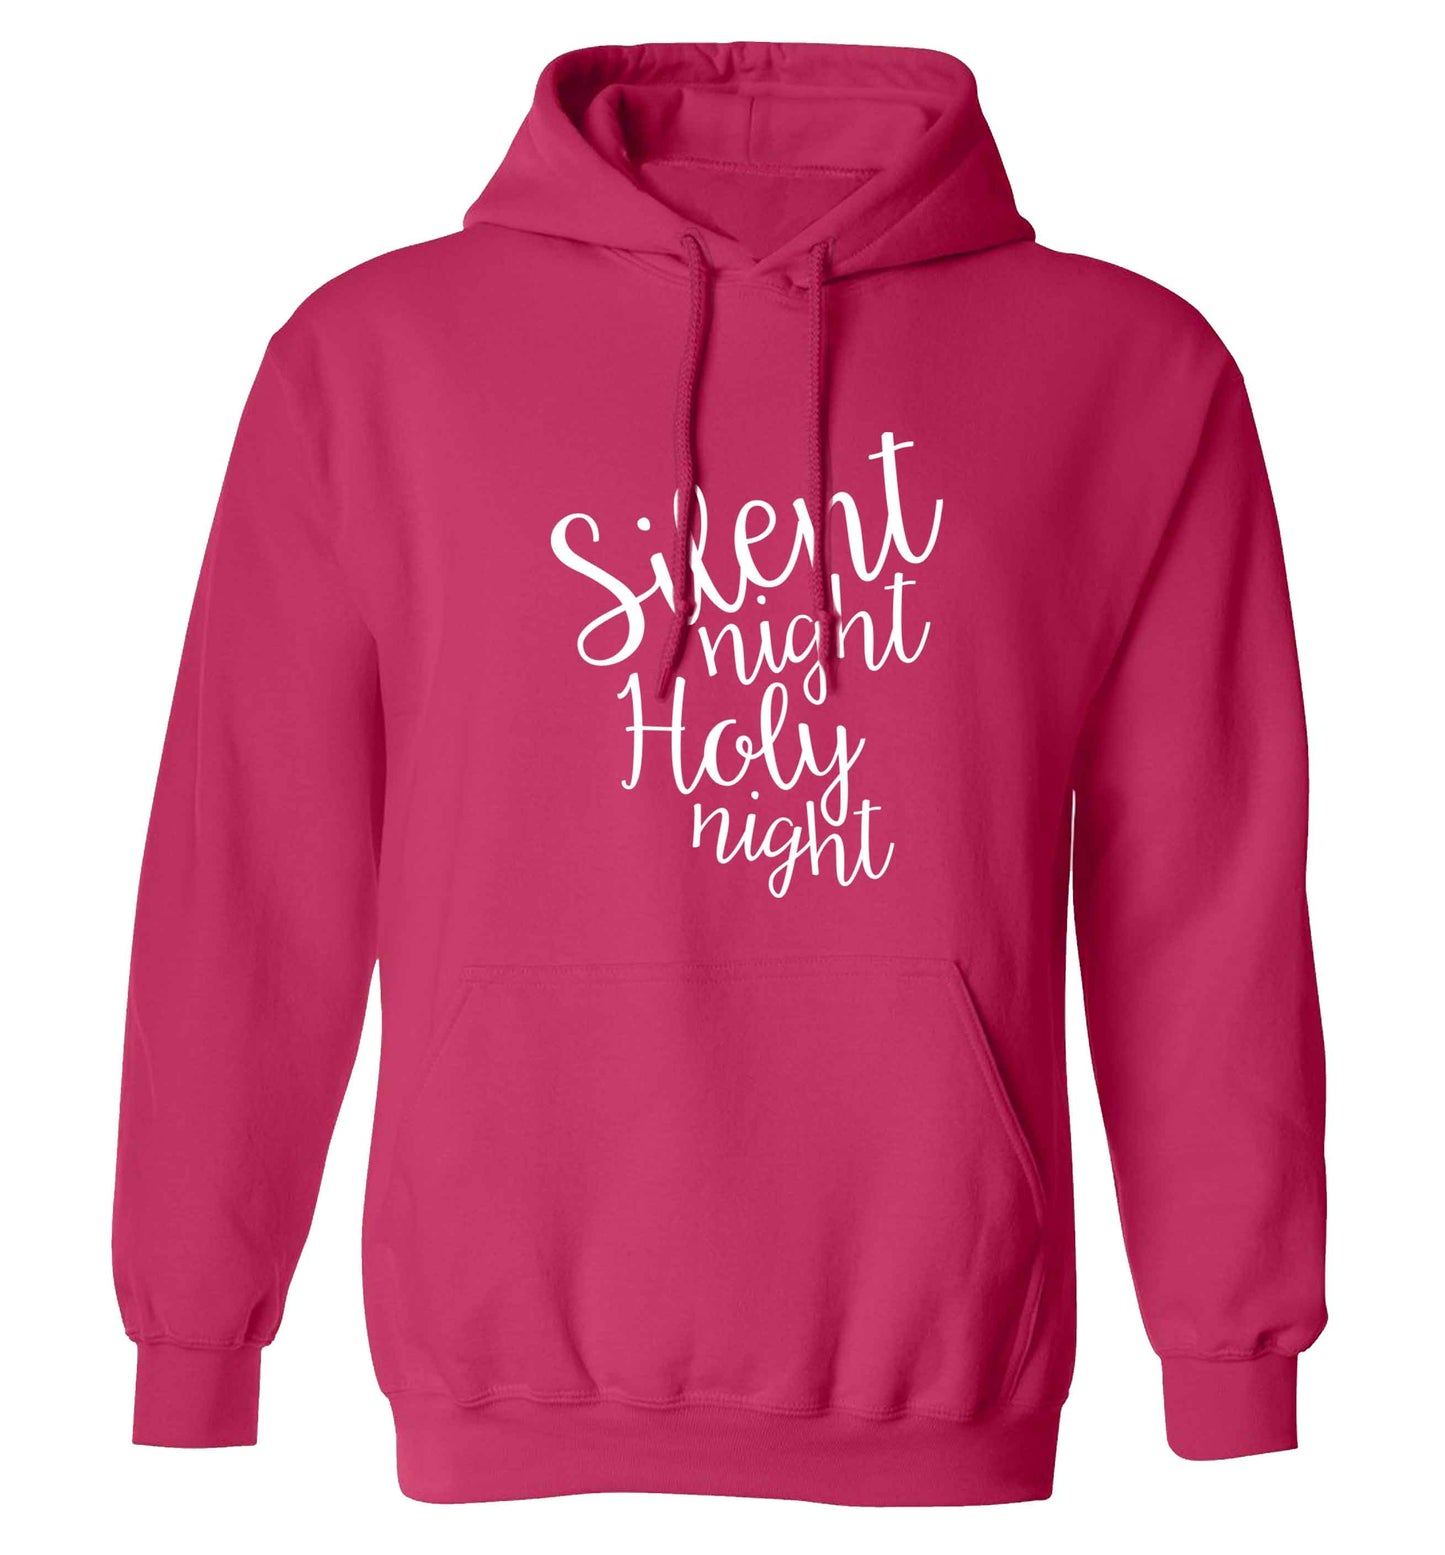 Silent night holy night adults unisex pink hoodie 2XL